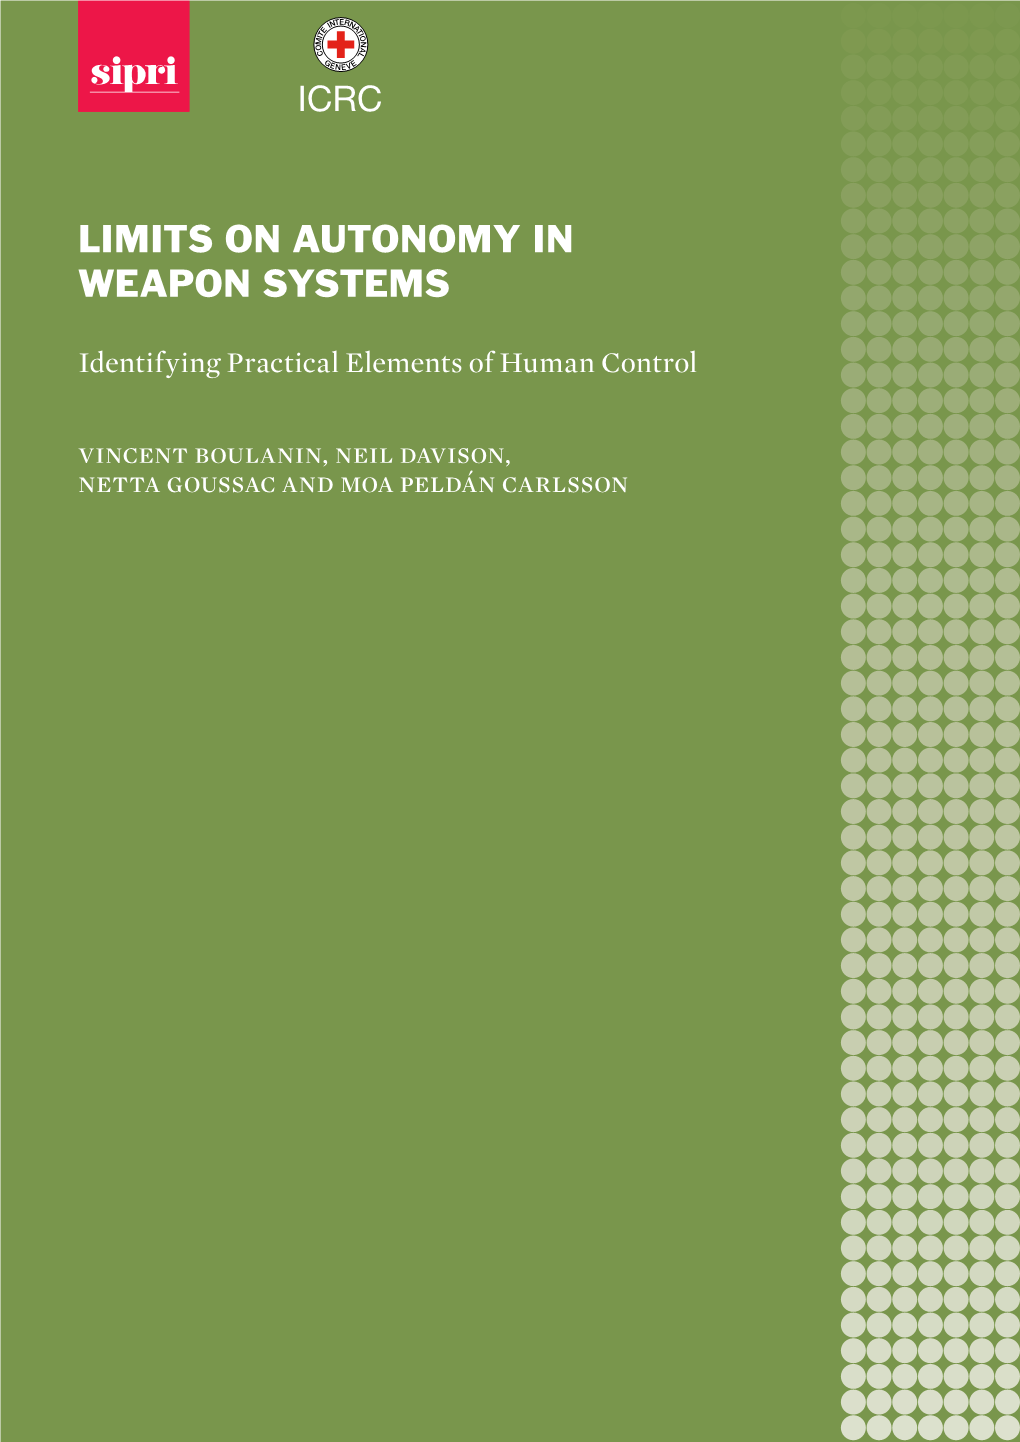 Limits on Autonomy in Weapon Systems